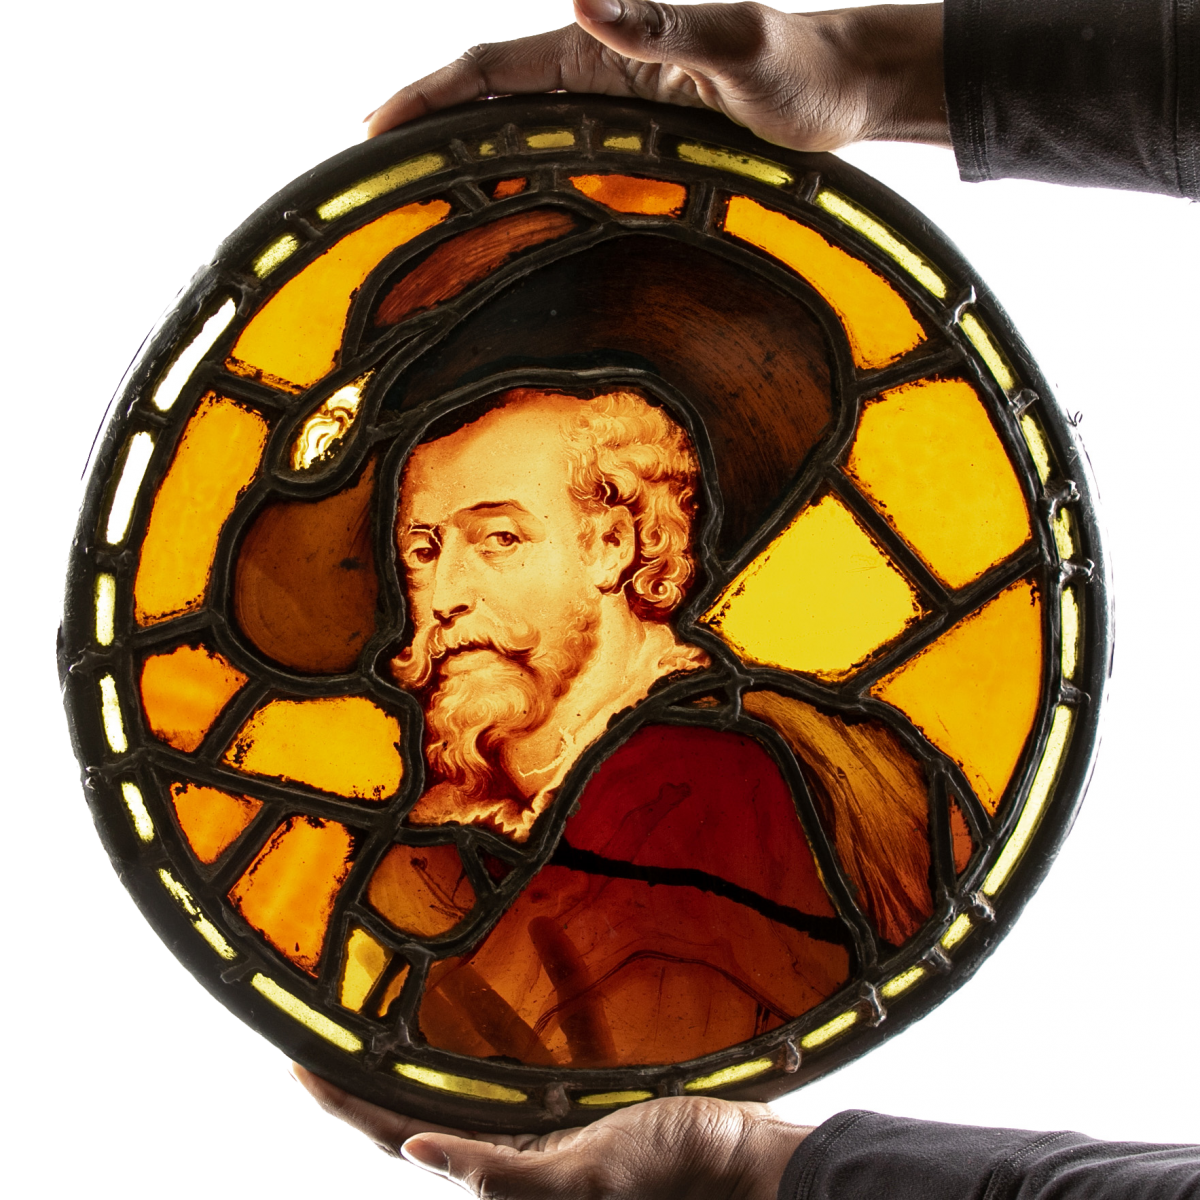 ANTIQUE STAINED GLASS WINDOW WITH HAND-PAINTED FIGURE OF A MAN, POSSIBLY PETER PAUL RUBENS item 73627